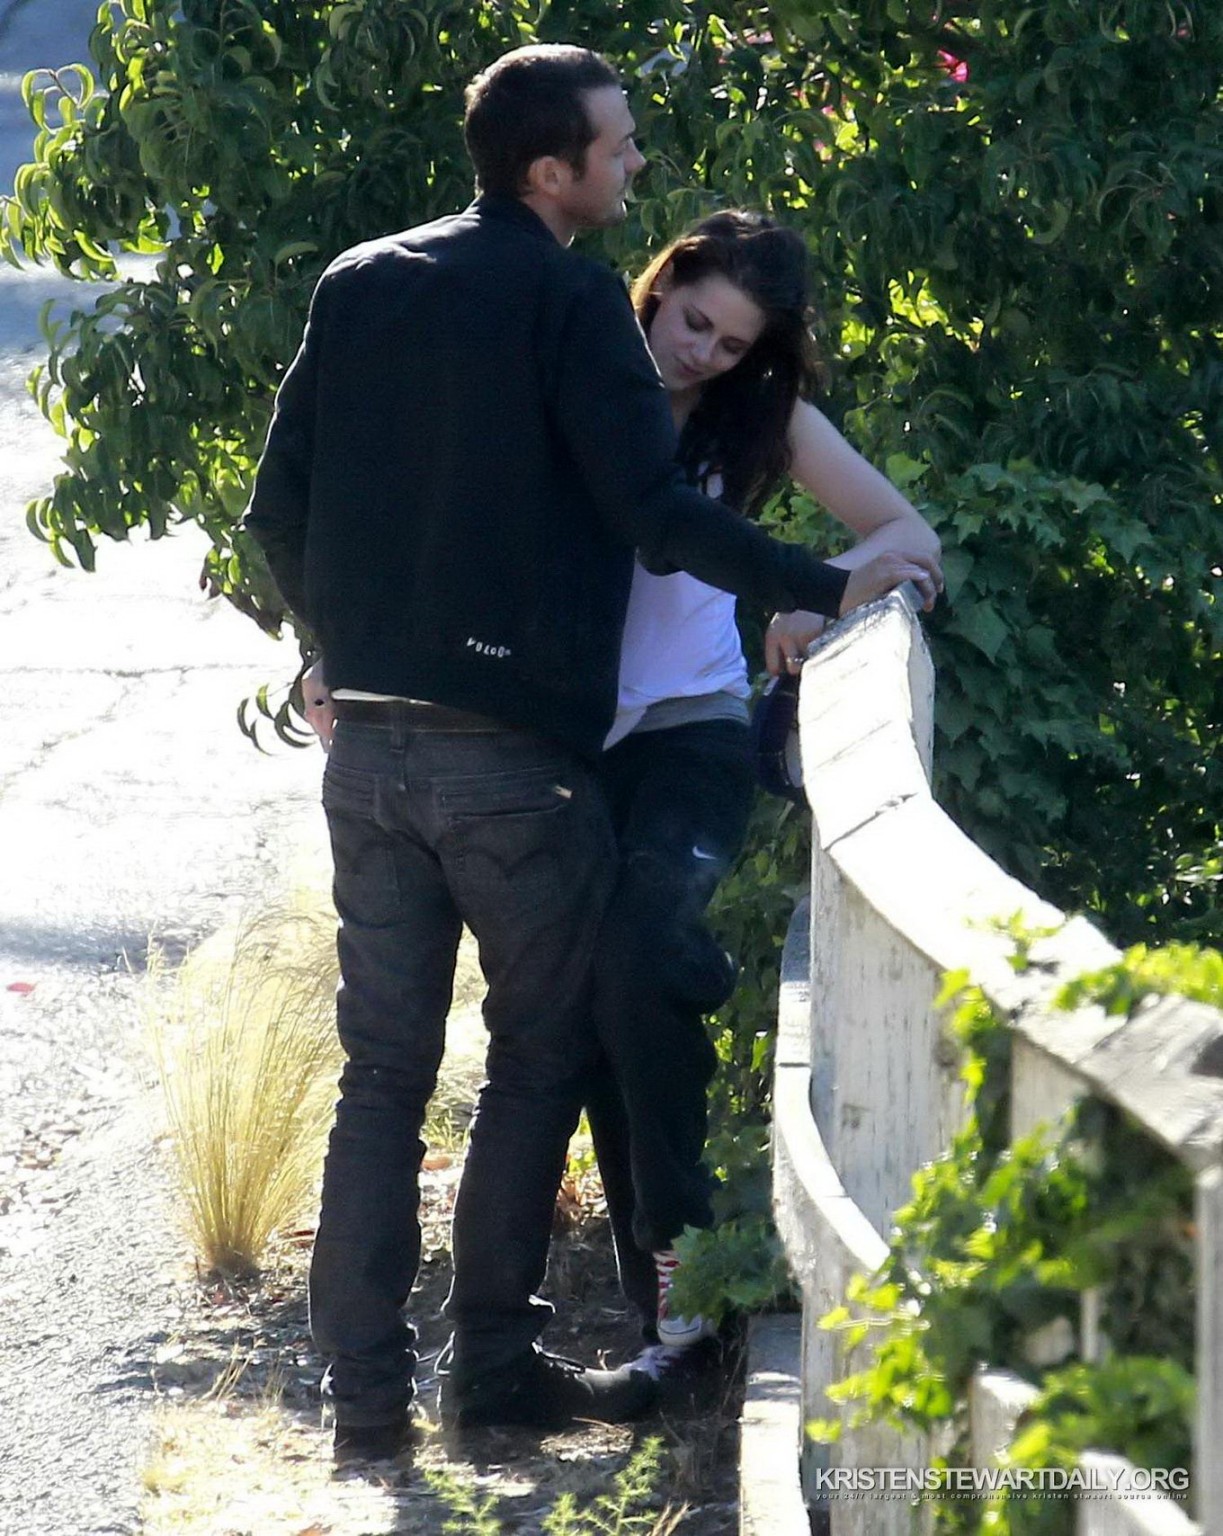 Kristen stewart getting groped dry humped on the side of the road
 #75256343